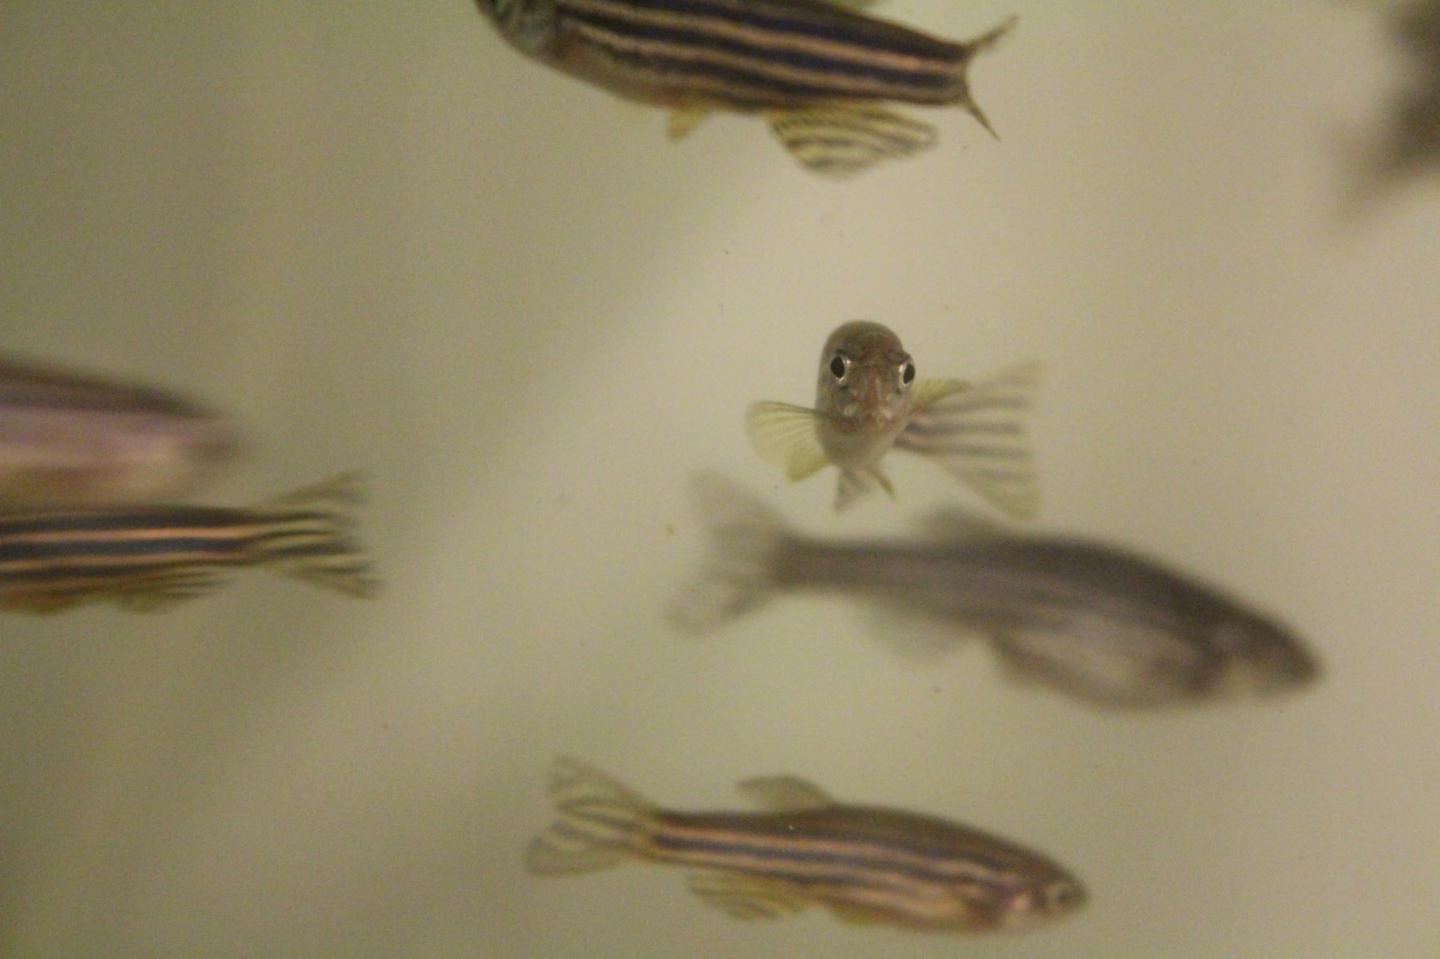 Sexual Selection in Fish Have Been Studied Using Model Species, Such as Zebrafish